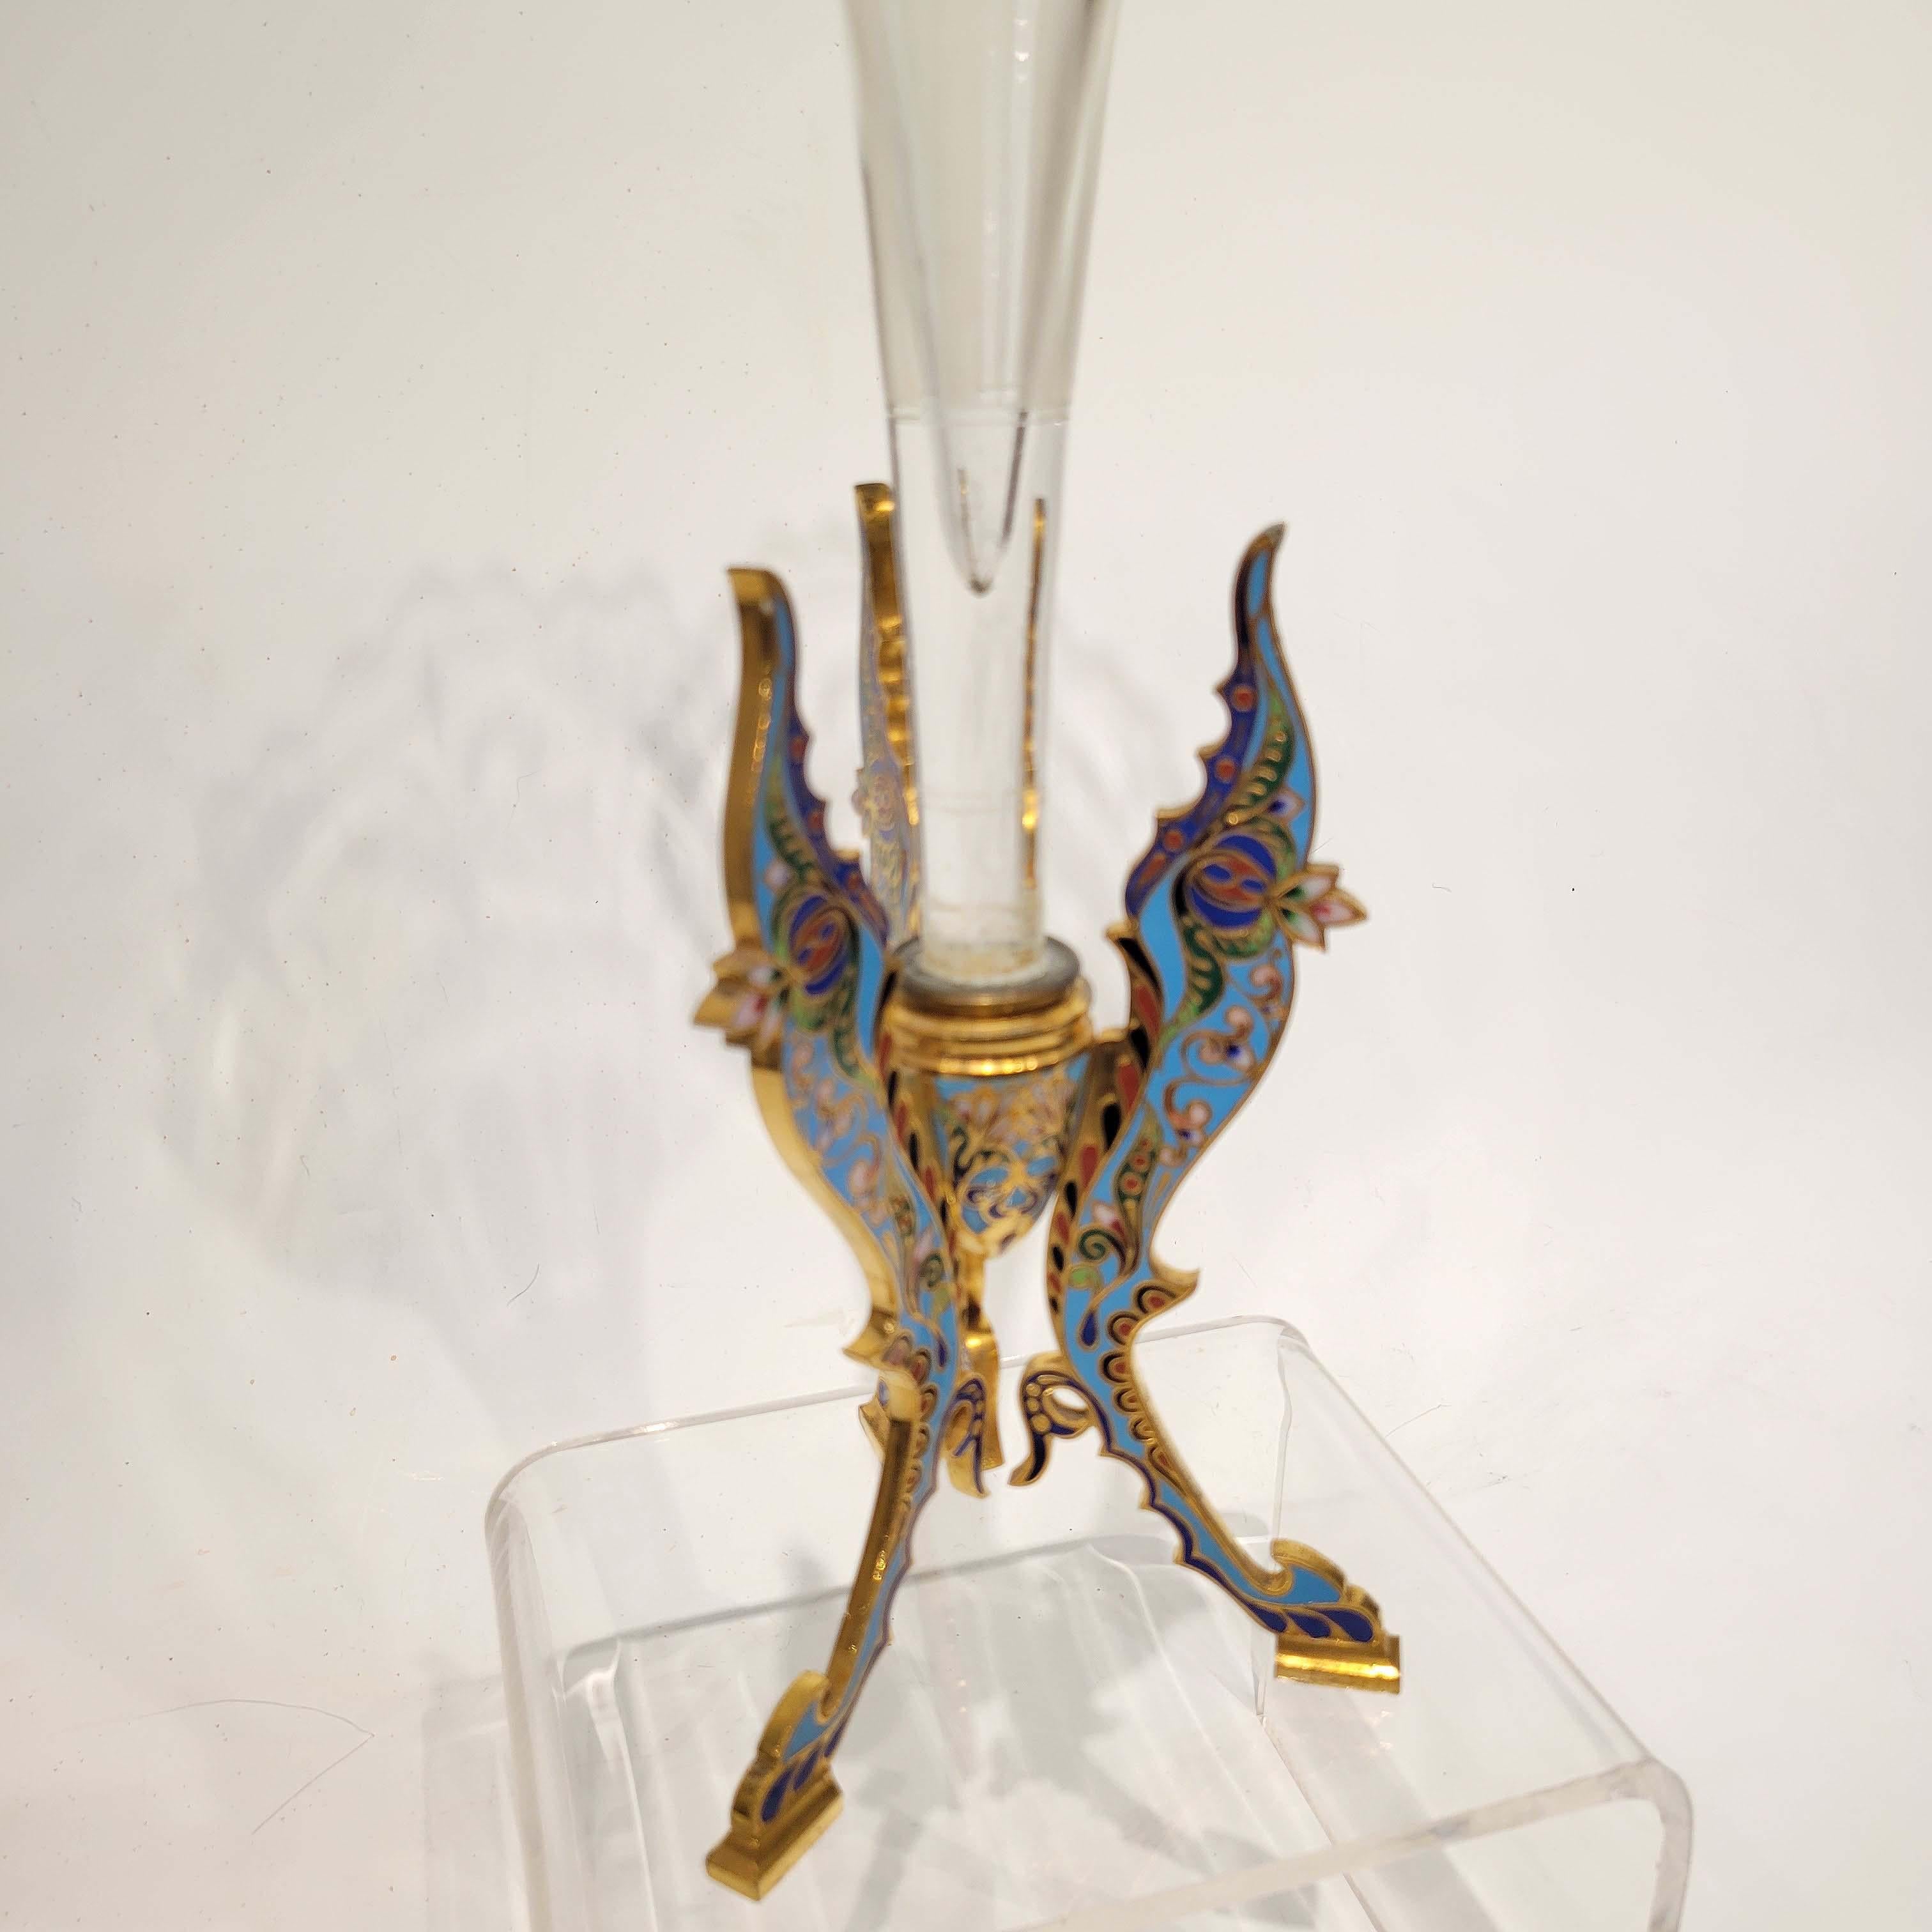 A magnificent quality champleve enamel on gilt bronze base holding an etched crystal trumpet vase. French, circa late 19th century. Attributed to Ferdinand Barbedienne foundry, Paris.
There are a few small chips on the glass at the very top,